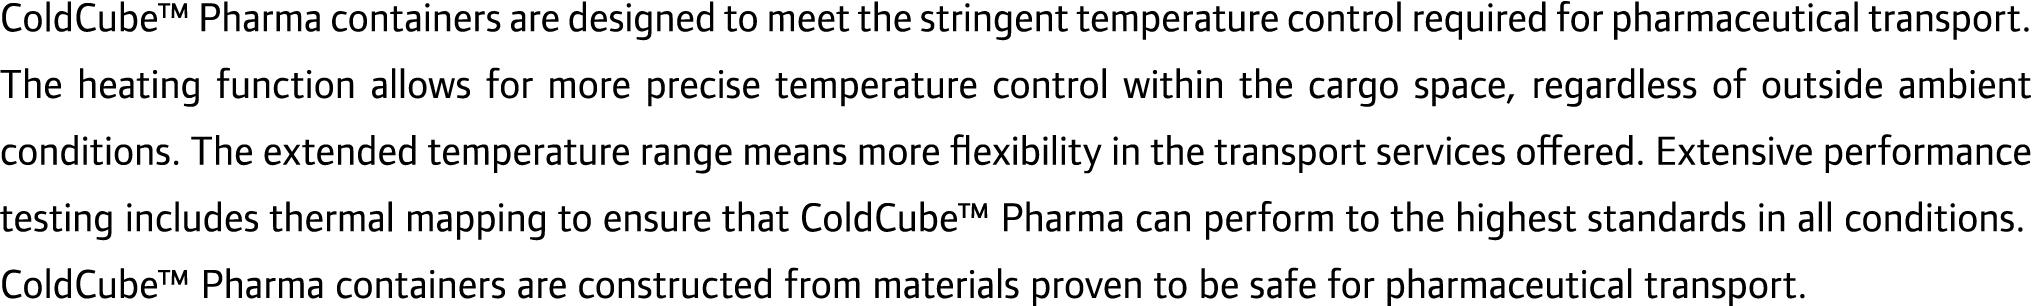 ColdCube™ Pharma containers are designed to meet the stringent temperature control required for pharmaceutical transp...